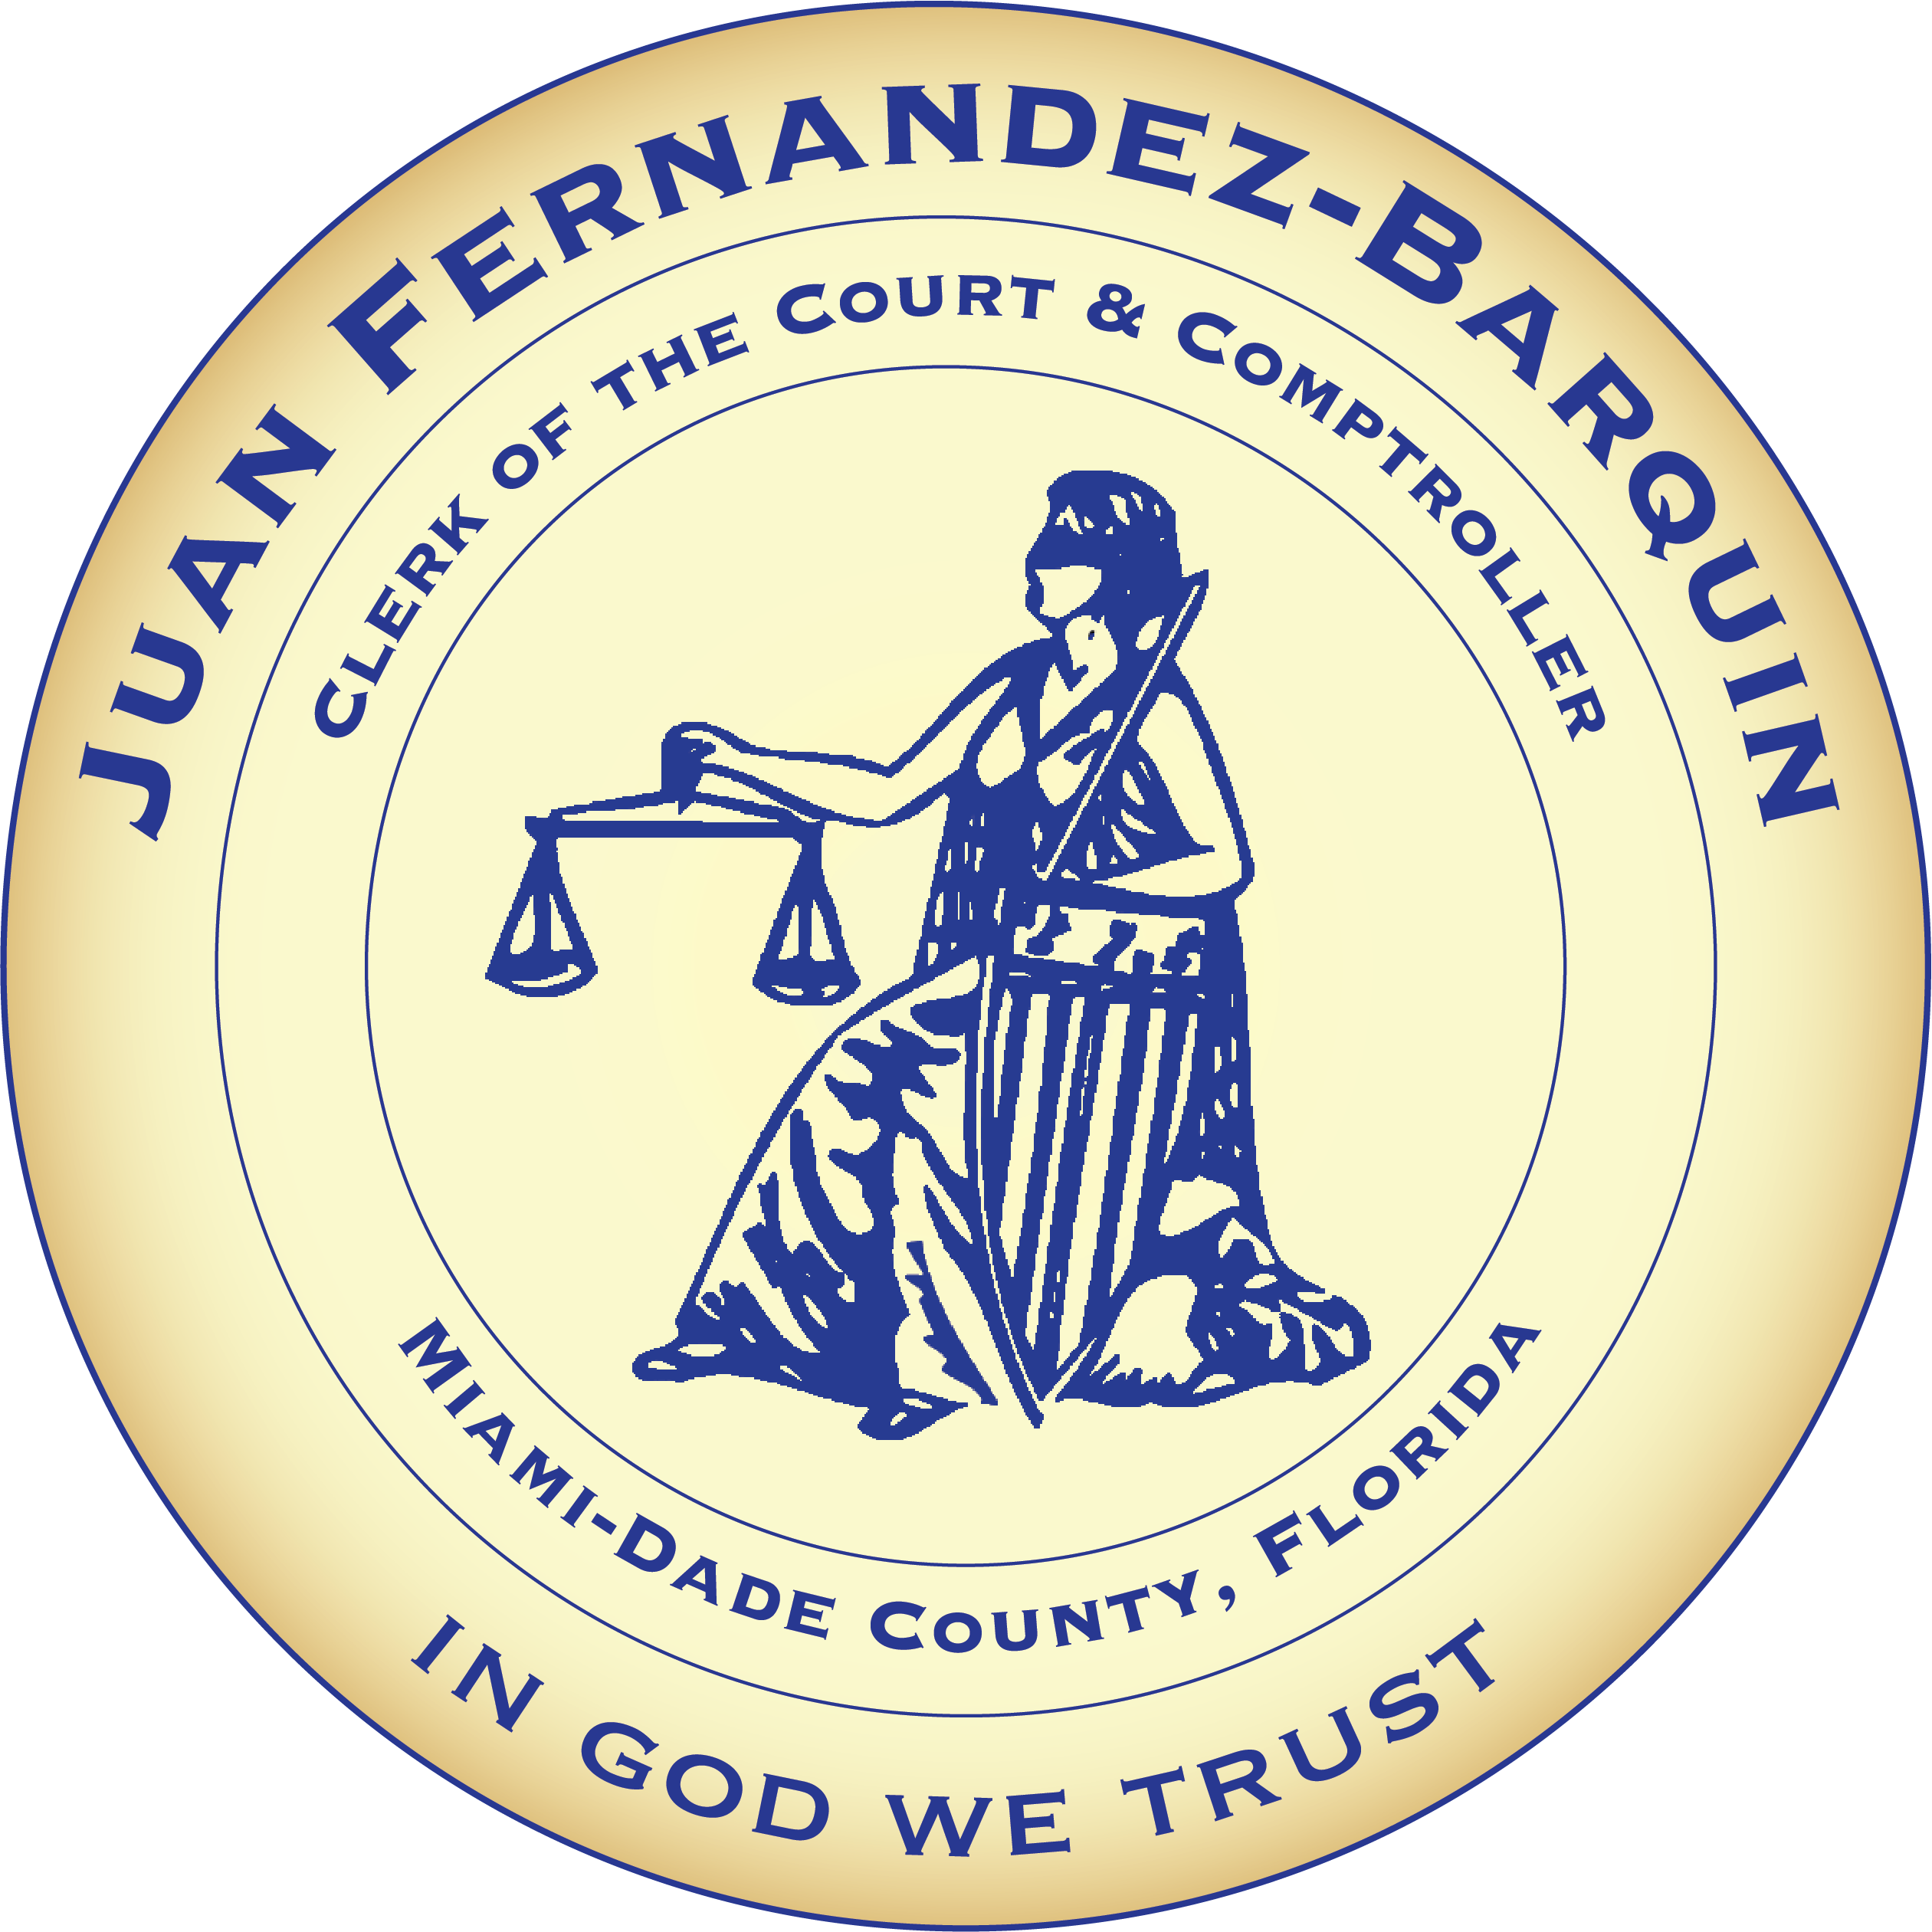 Clerk of the Courts - Miami-Dade County, Florida